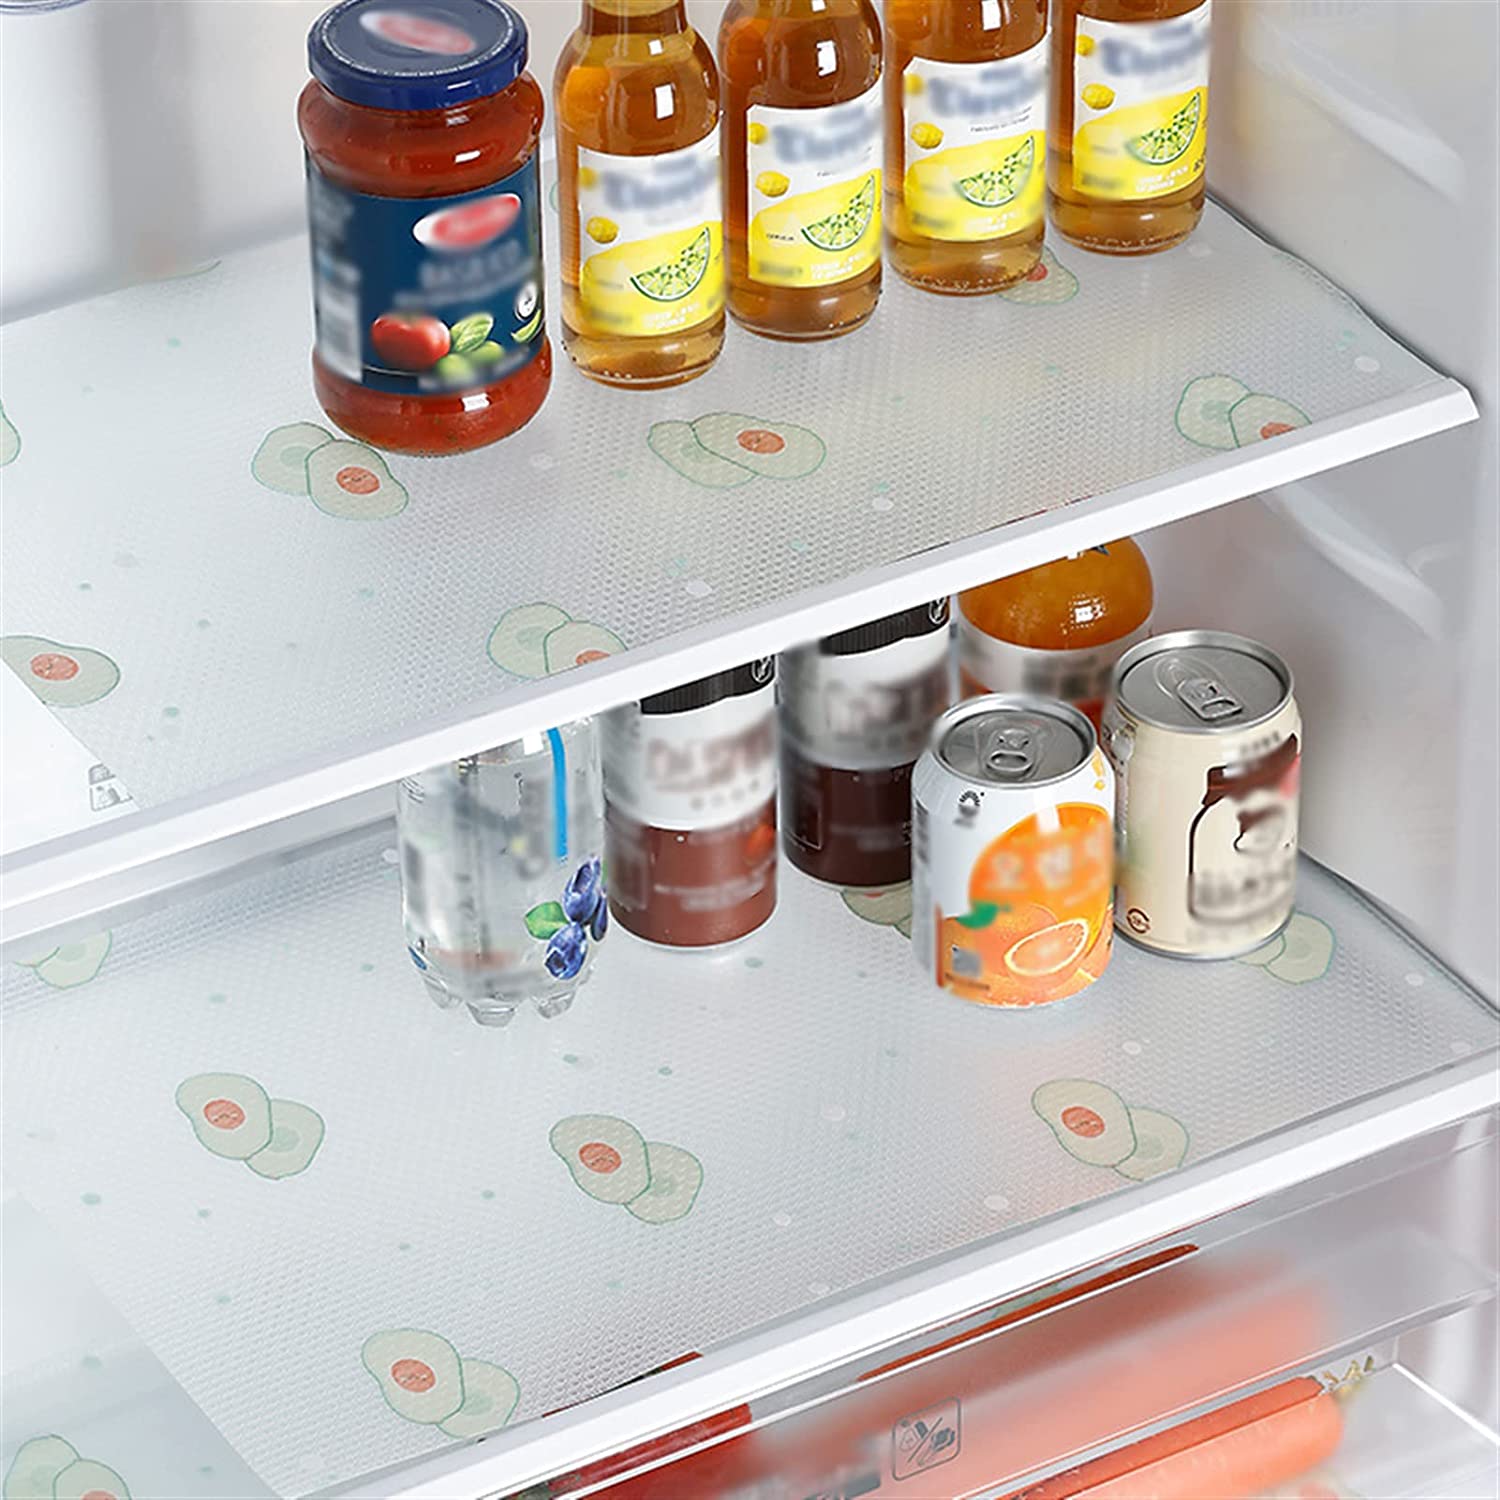 Refrigerator stocked with food and beverages, showcasing Anti-Slip Refrigerator Kitchen Cabinet Drawer Shelf Mat Liner Sheets.